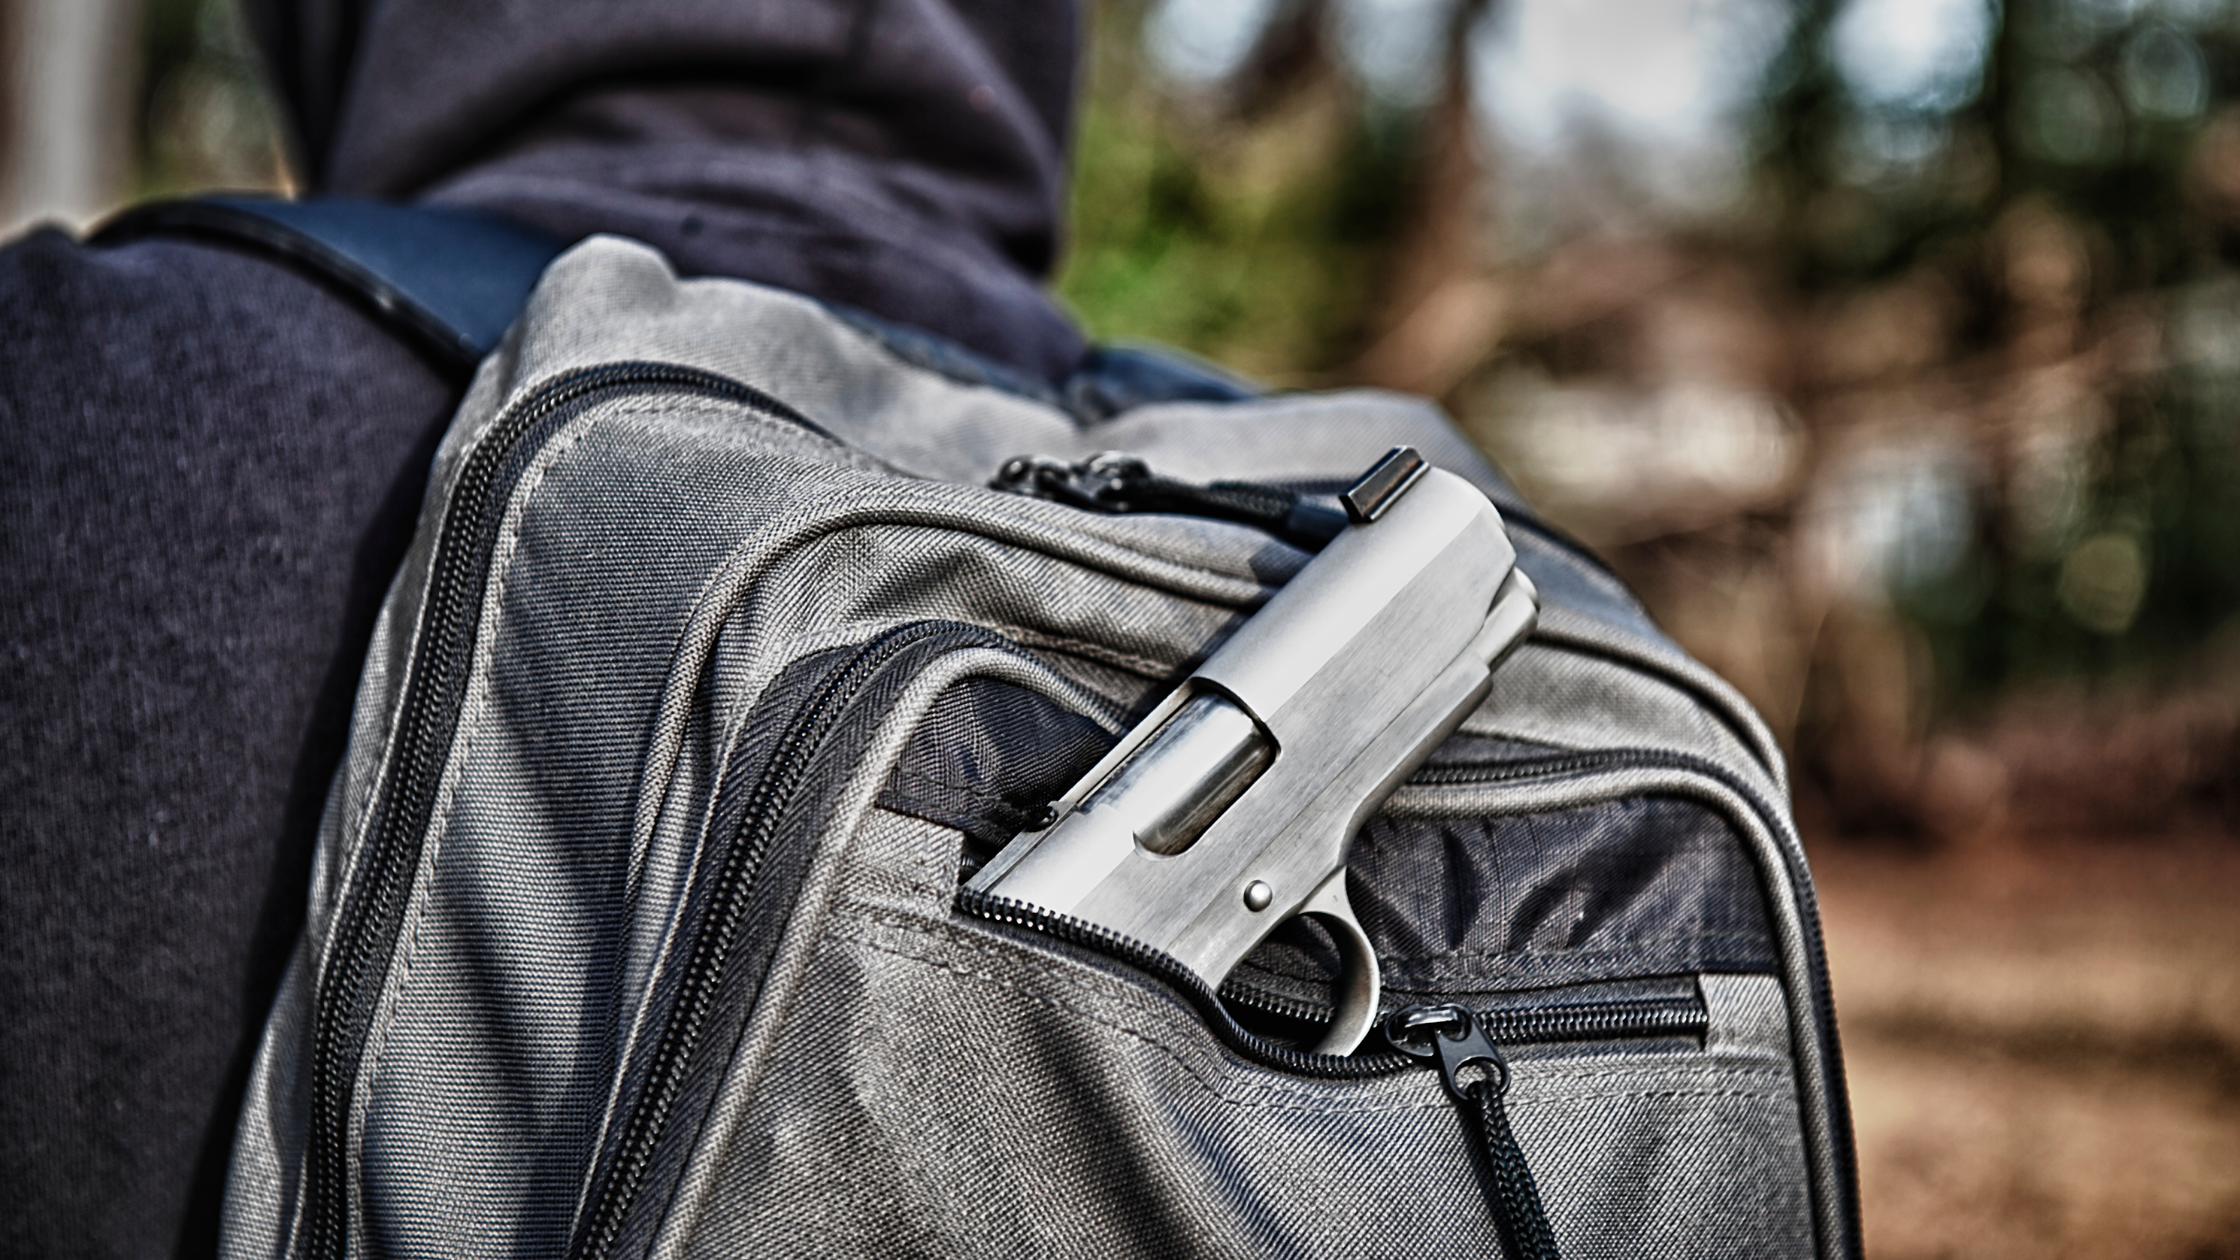 A black handgun rests part way in the front pocket of a black backpack on the back of a hoodie wearing individual